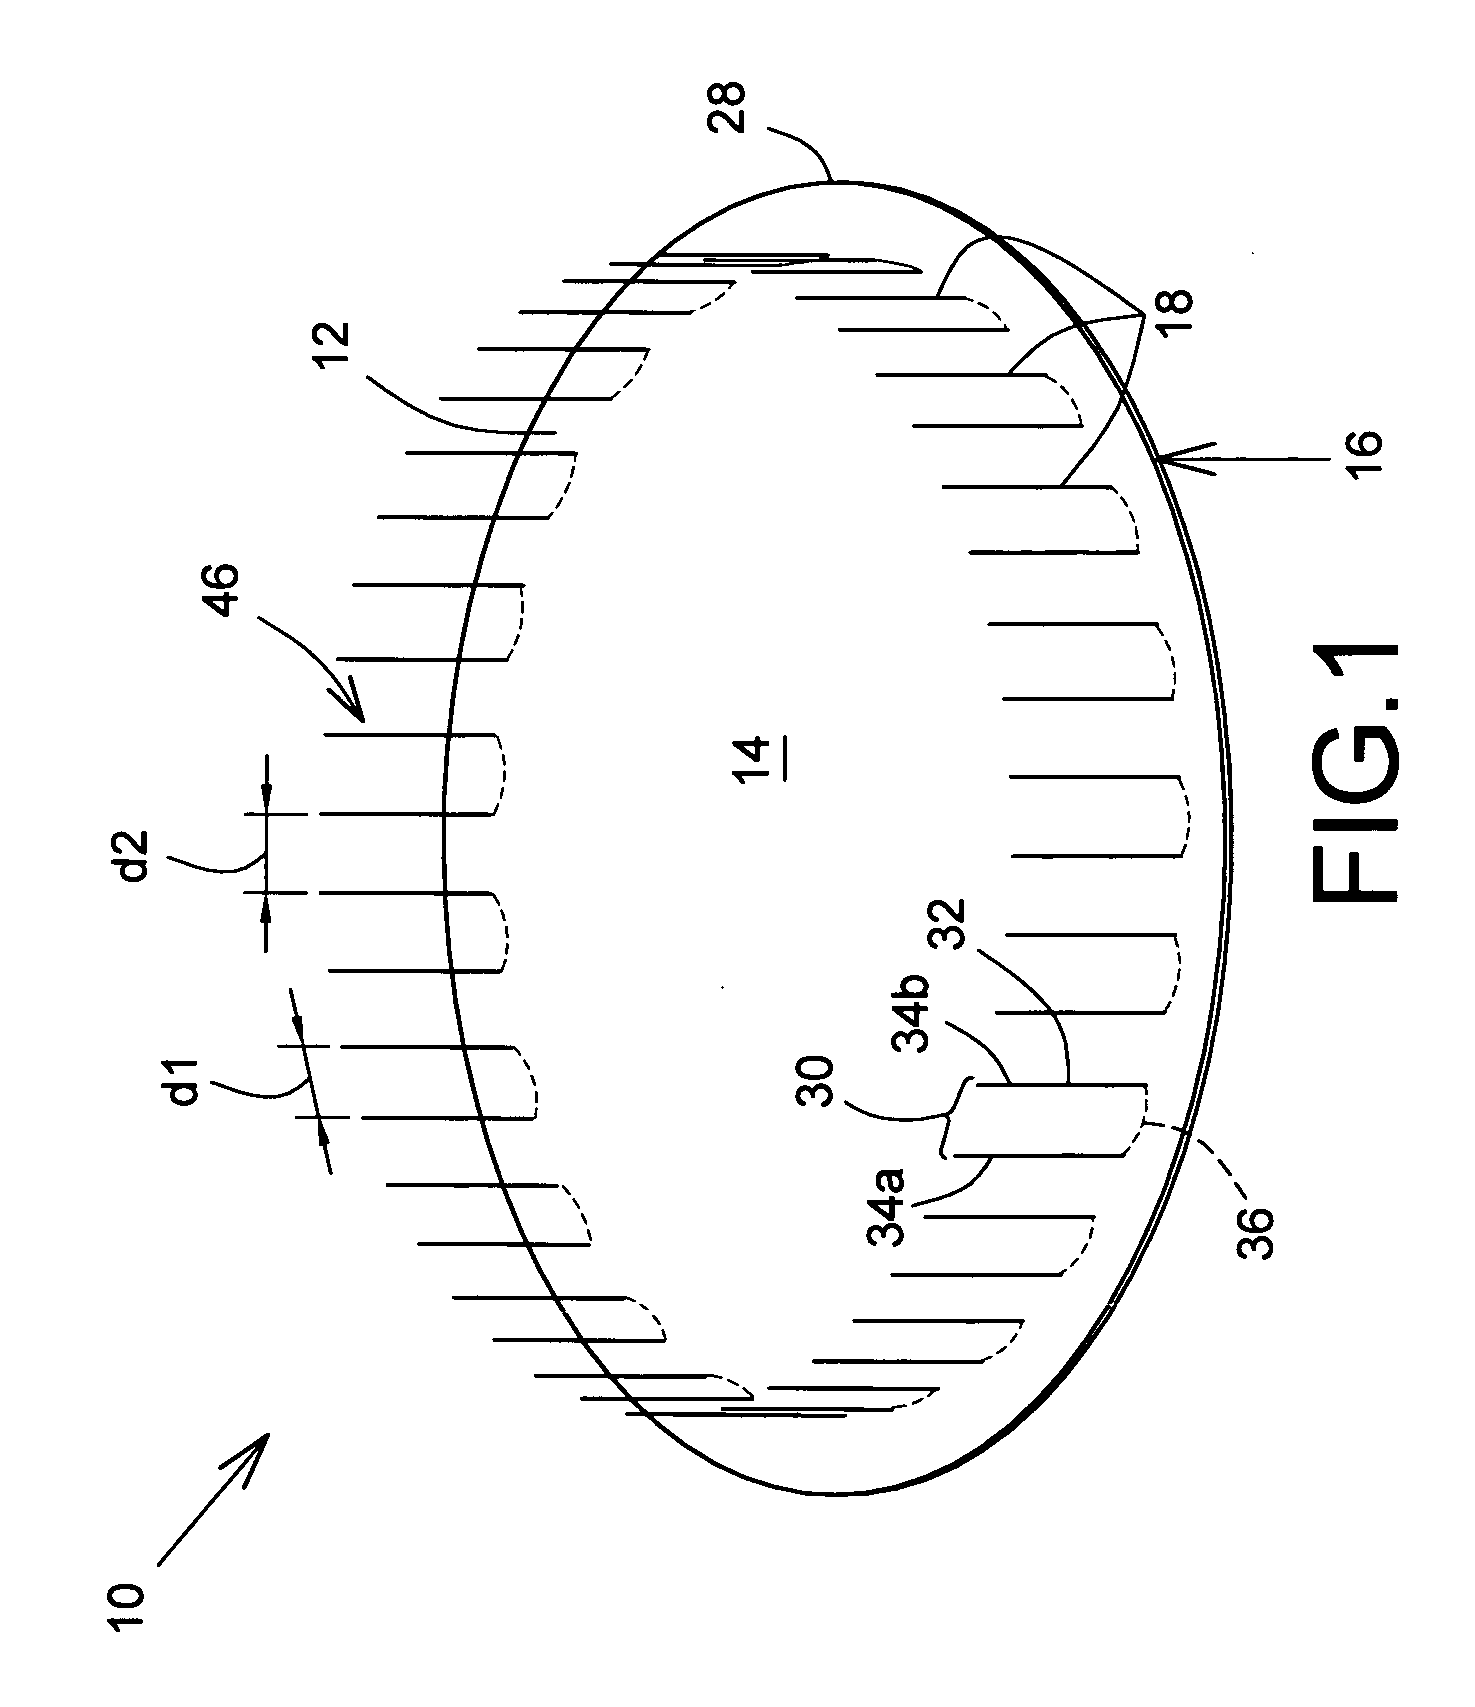 Prosthetic repair patch with integrated sutures and method therefor